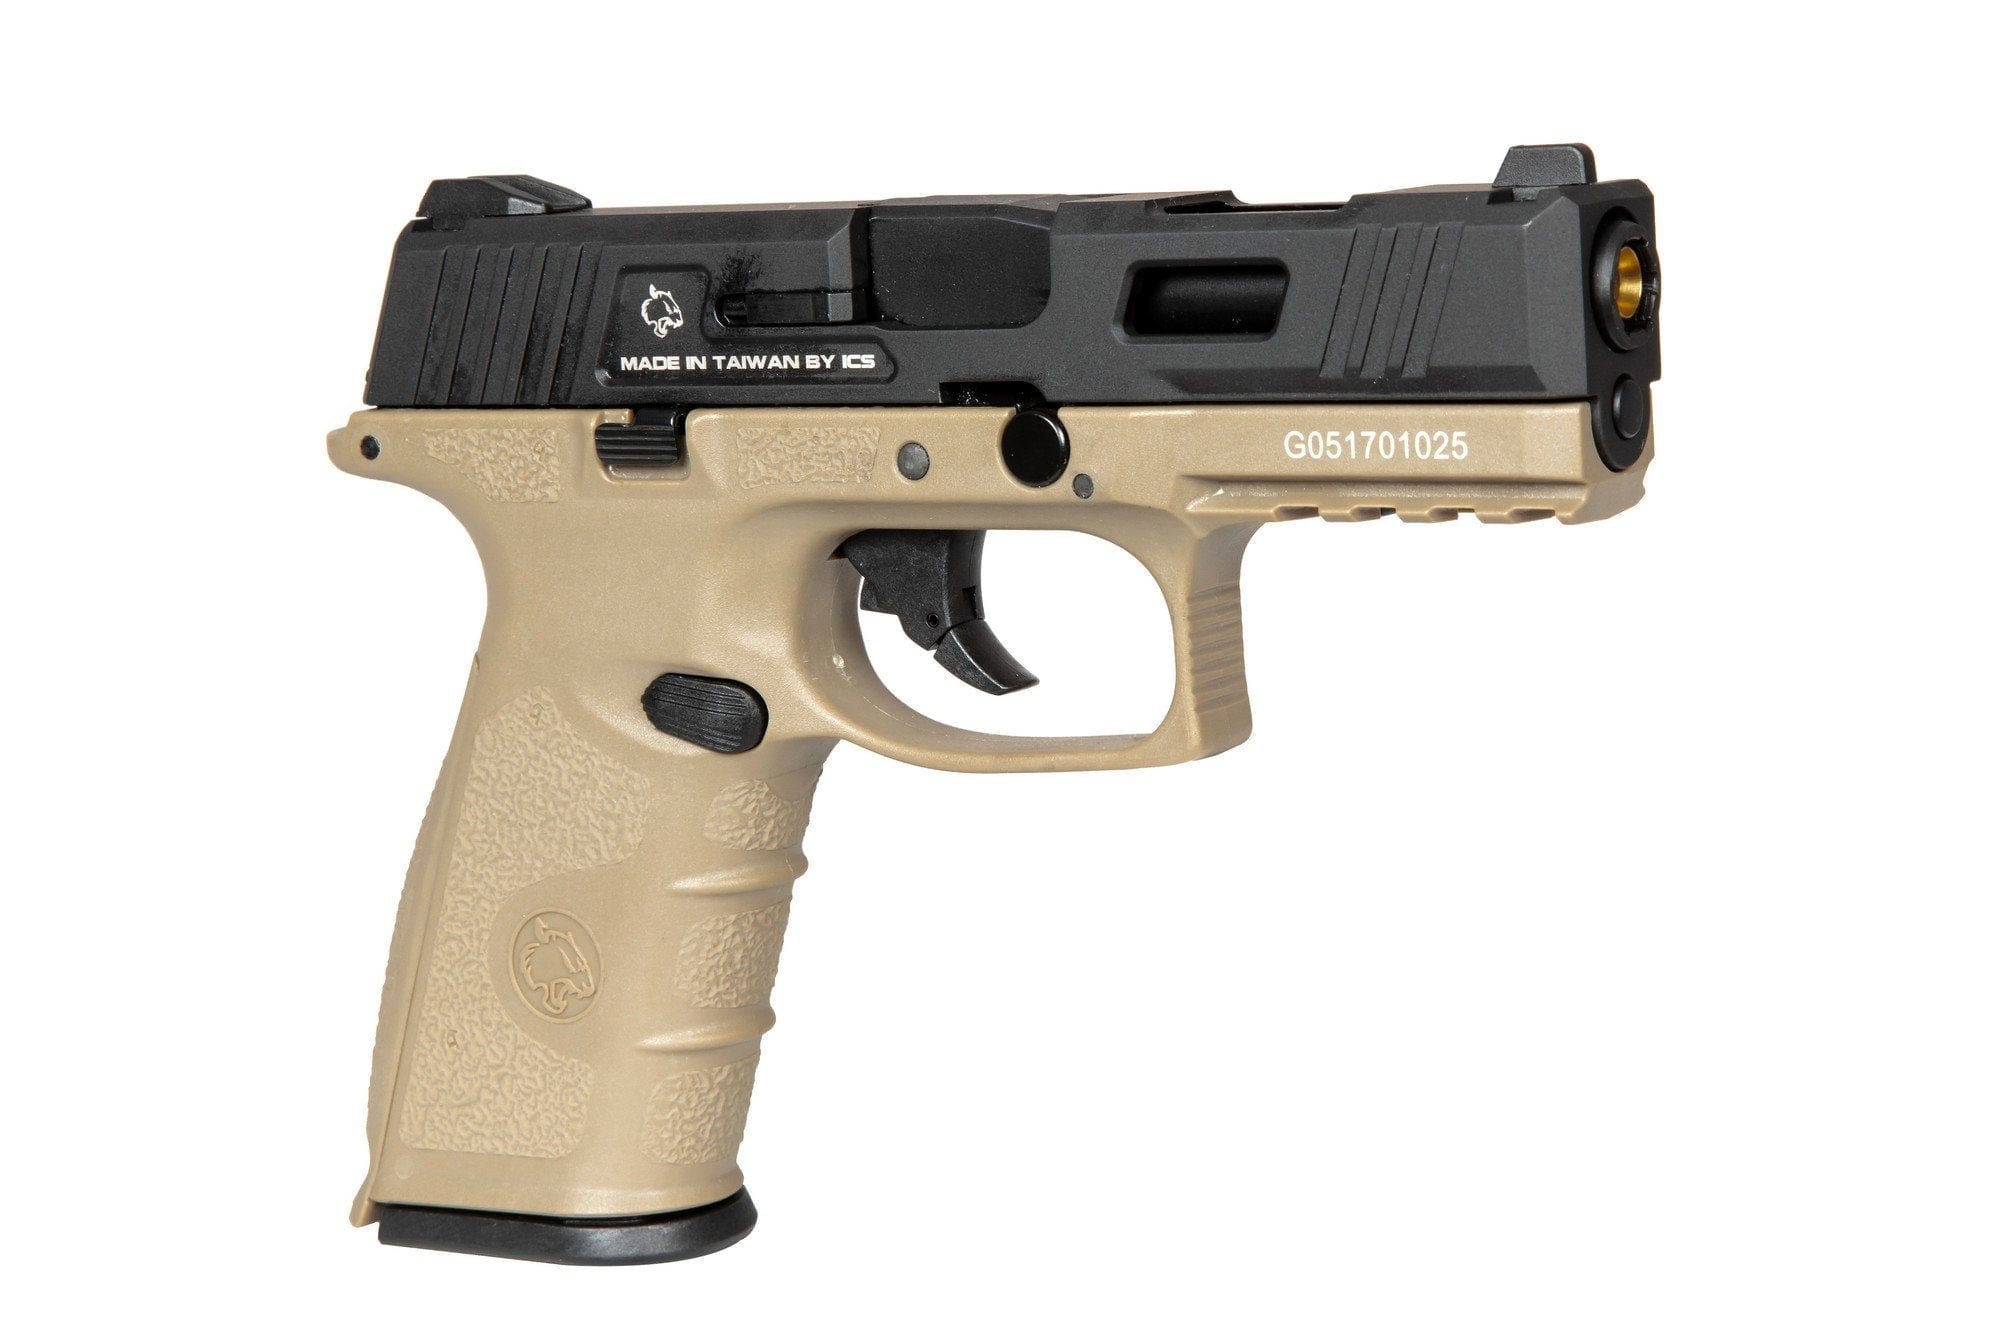 BLE-XFG Pistol Replica - tan / black by ICS on Airsoft Mania Europe